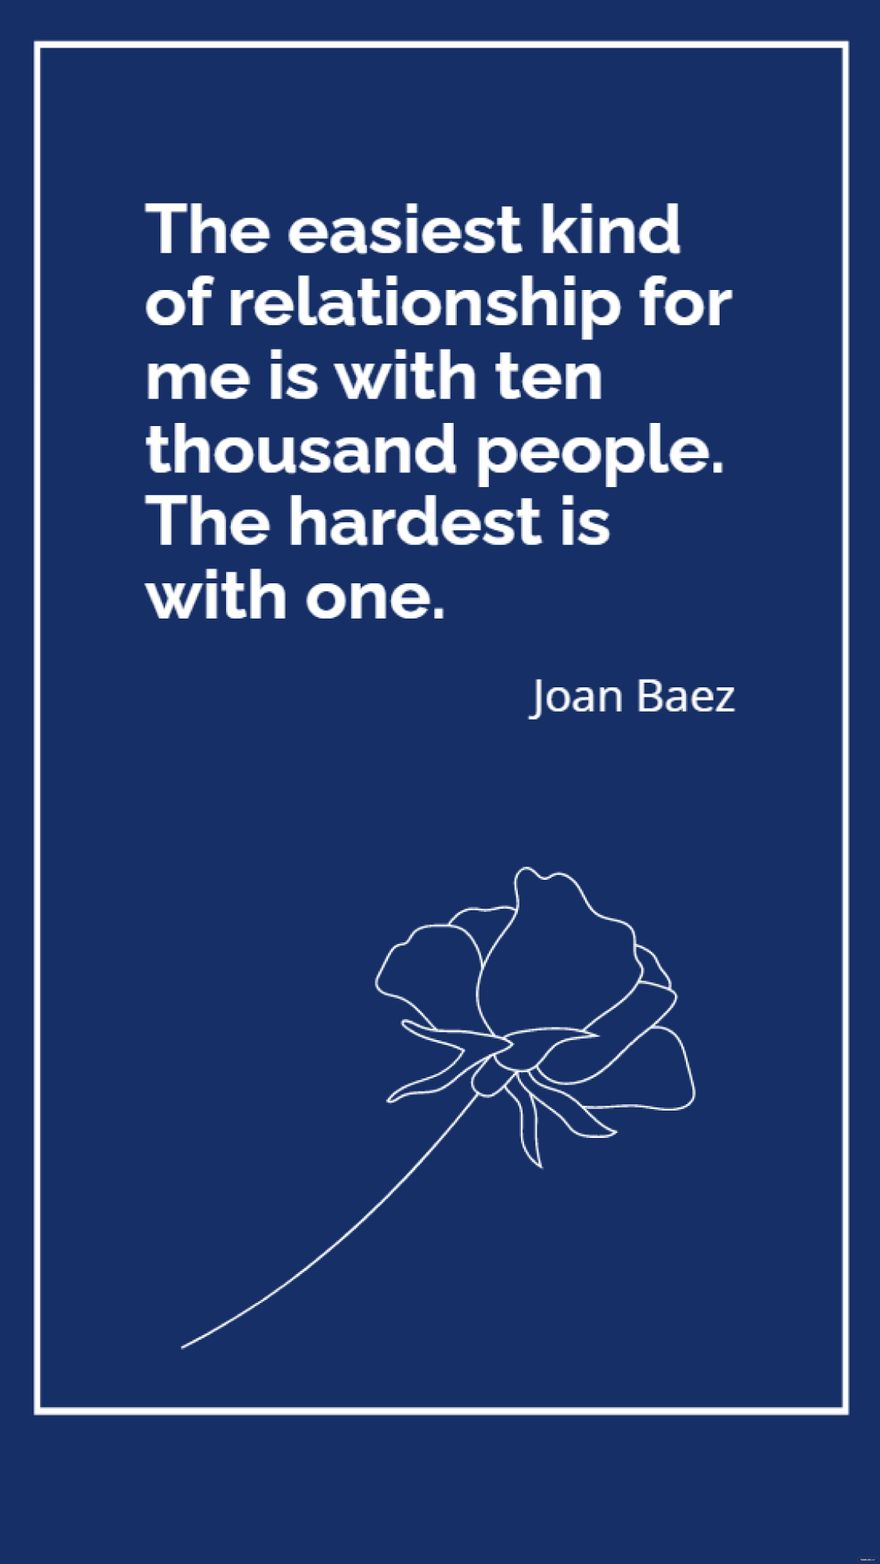 Joan Baez - The easiest kind of relationship for me is with ten thousand people. The hardest is with one.